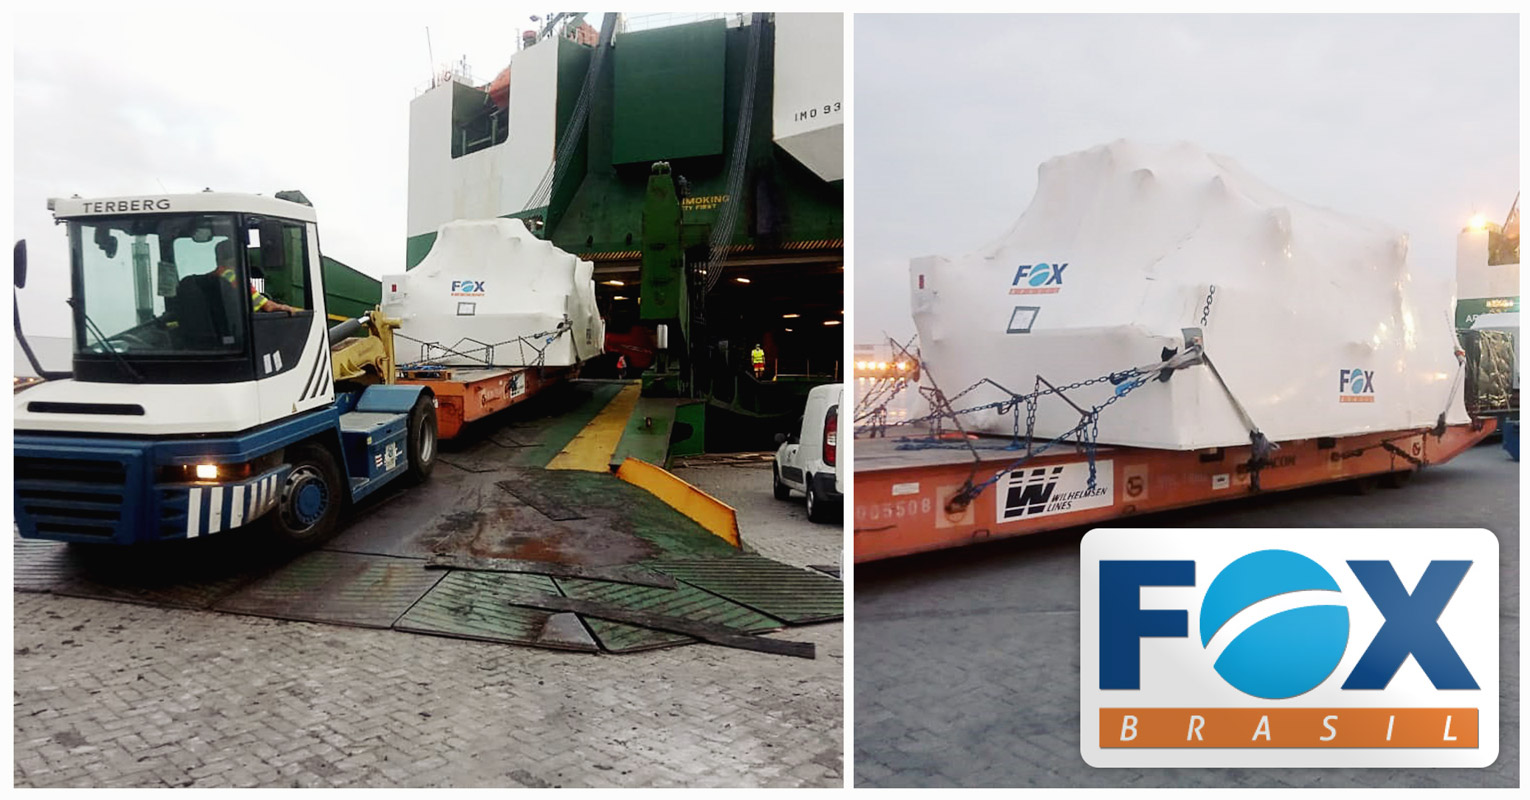 Fox Brasil Project Logistics Coordinated the Door-to-Port Logistics of an OOG Turbine + Accessories from Brazil to North America's Green Zone